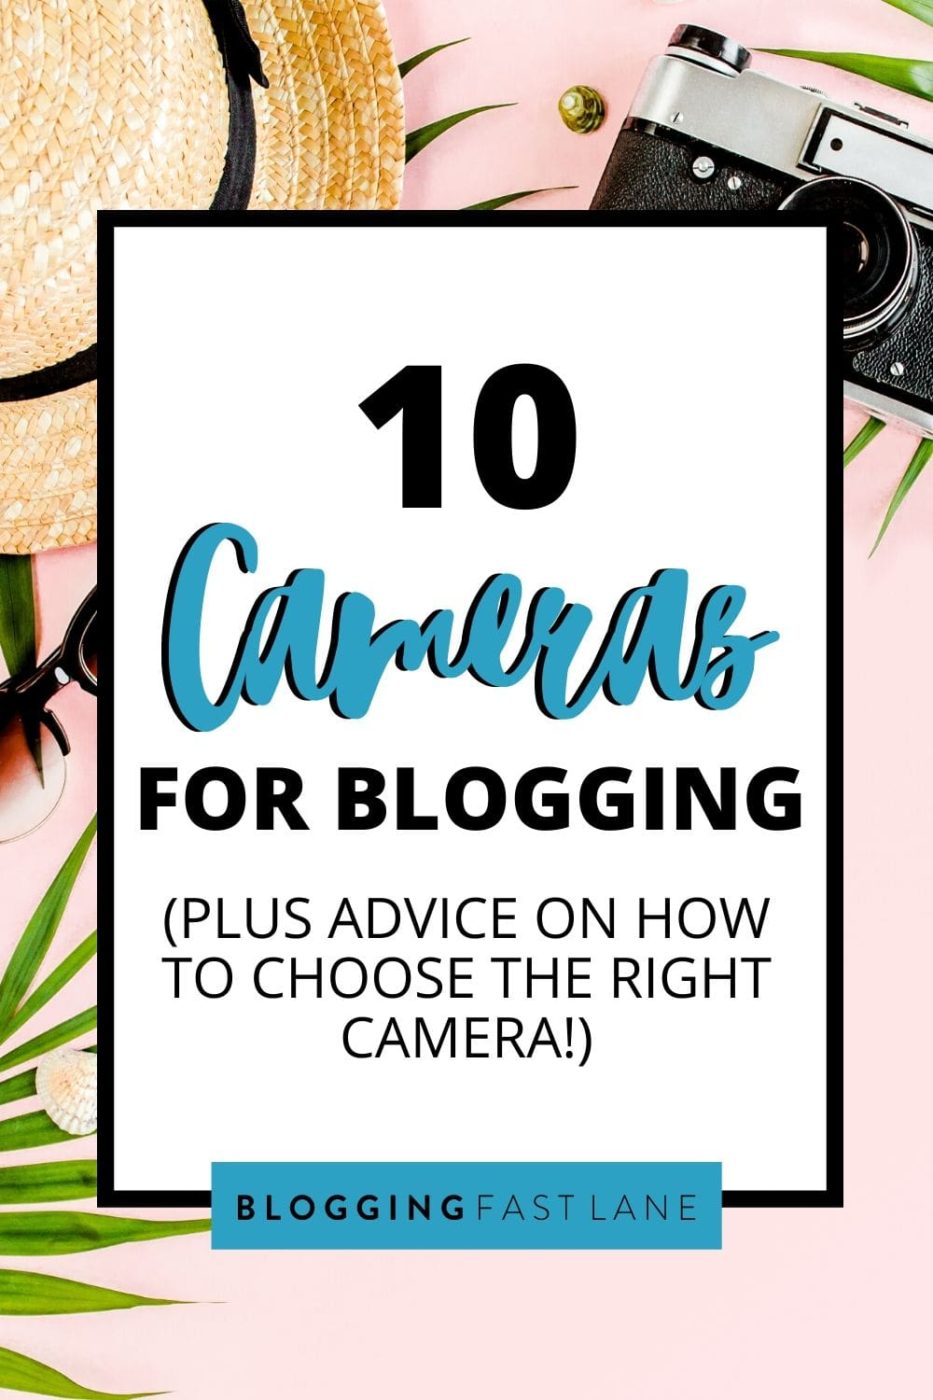 Best Cameras for Blogging | If a picture is worth 1000 words, you'd better have the best camera to make your blog images pop. Click here to check out our top 10 blogging camera recommendations!